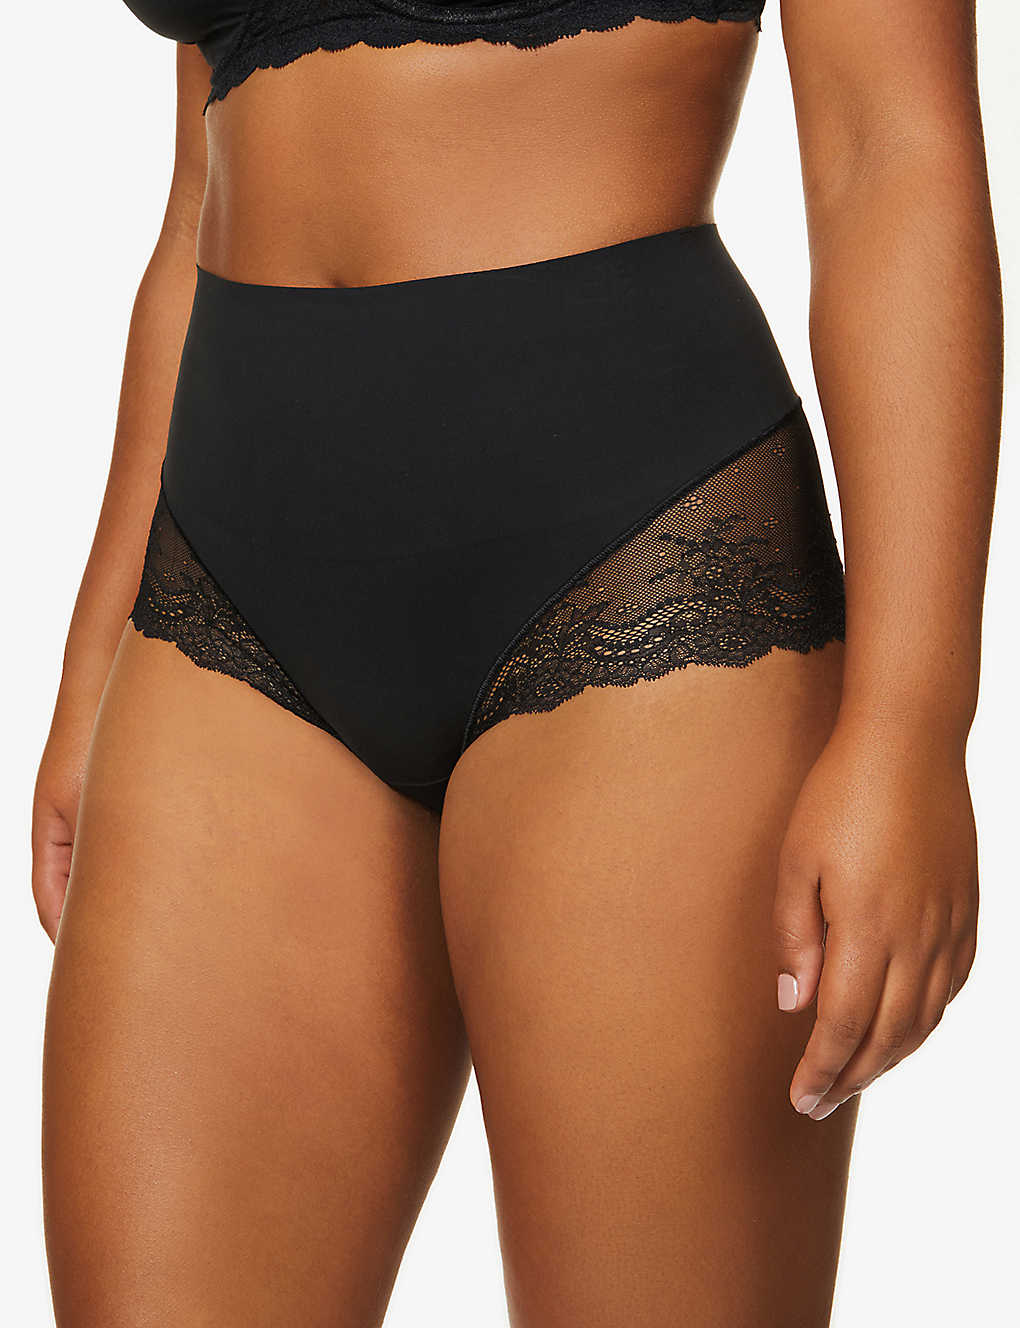 Shop Spanx Women's Very Black Undie-tectable Floral-lace Hipster Briefs